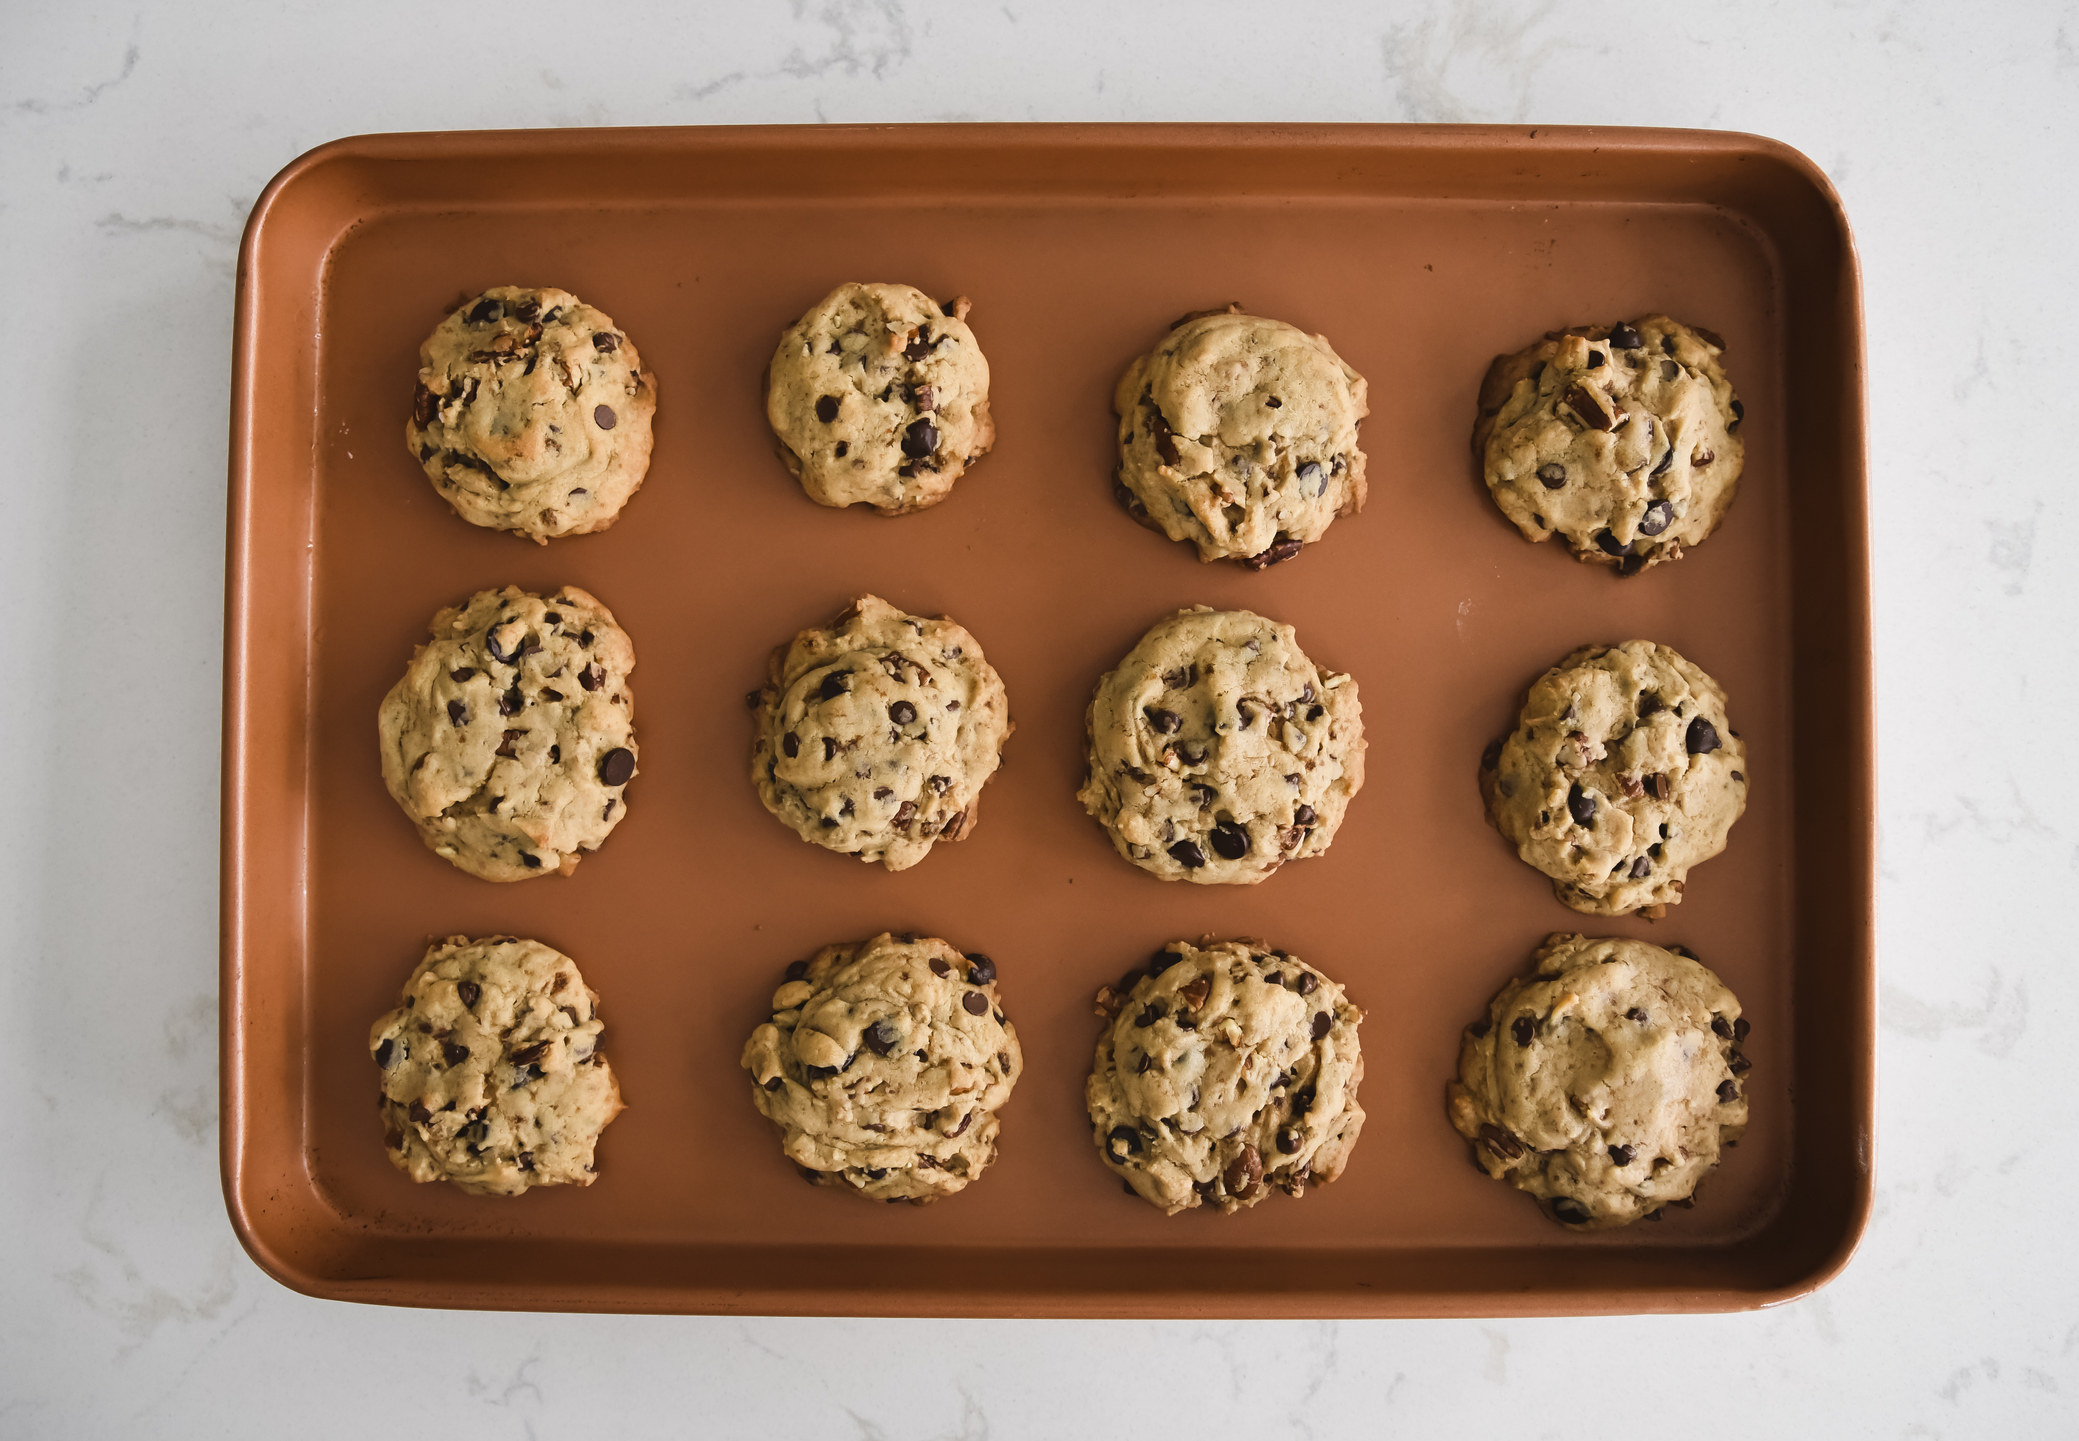 Sheet pan of freshly baked chocolate chip cookies shot from above